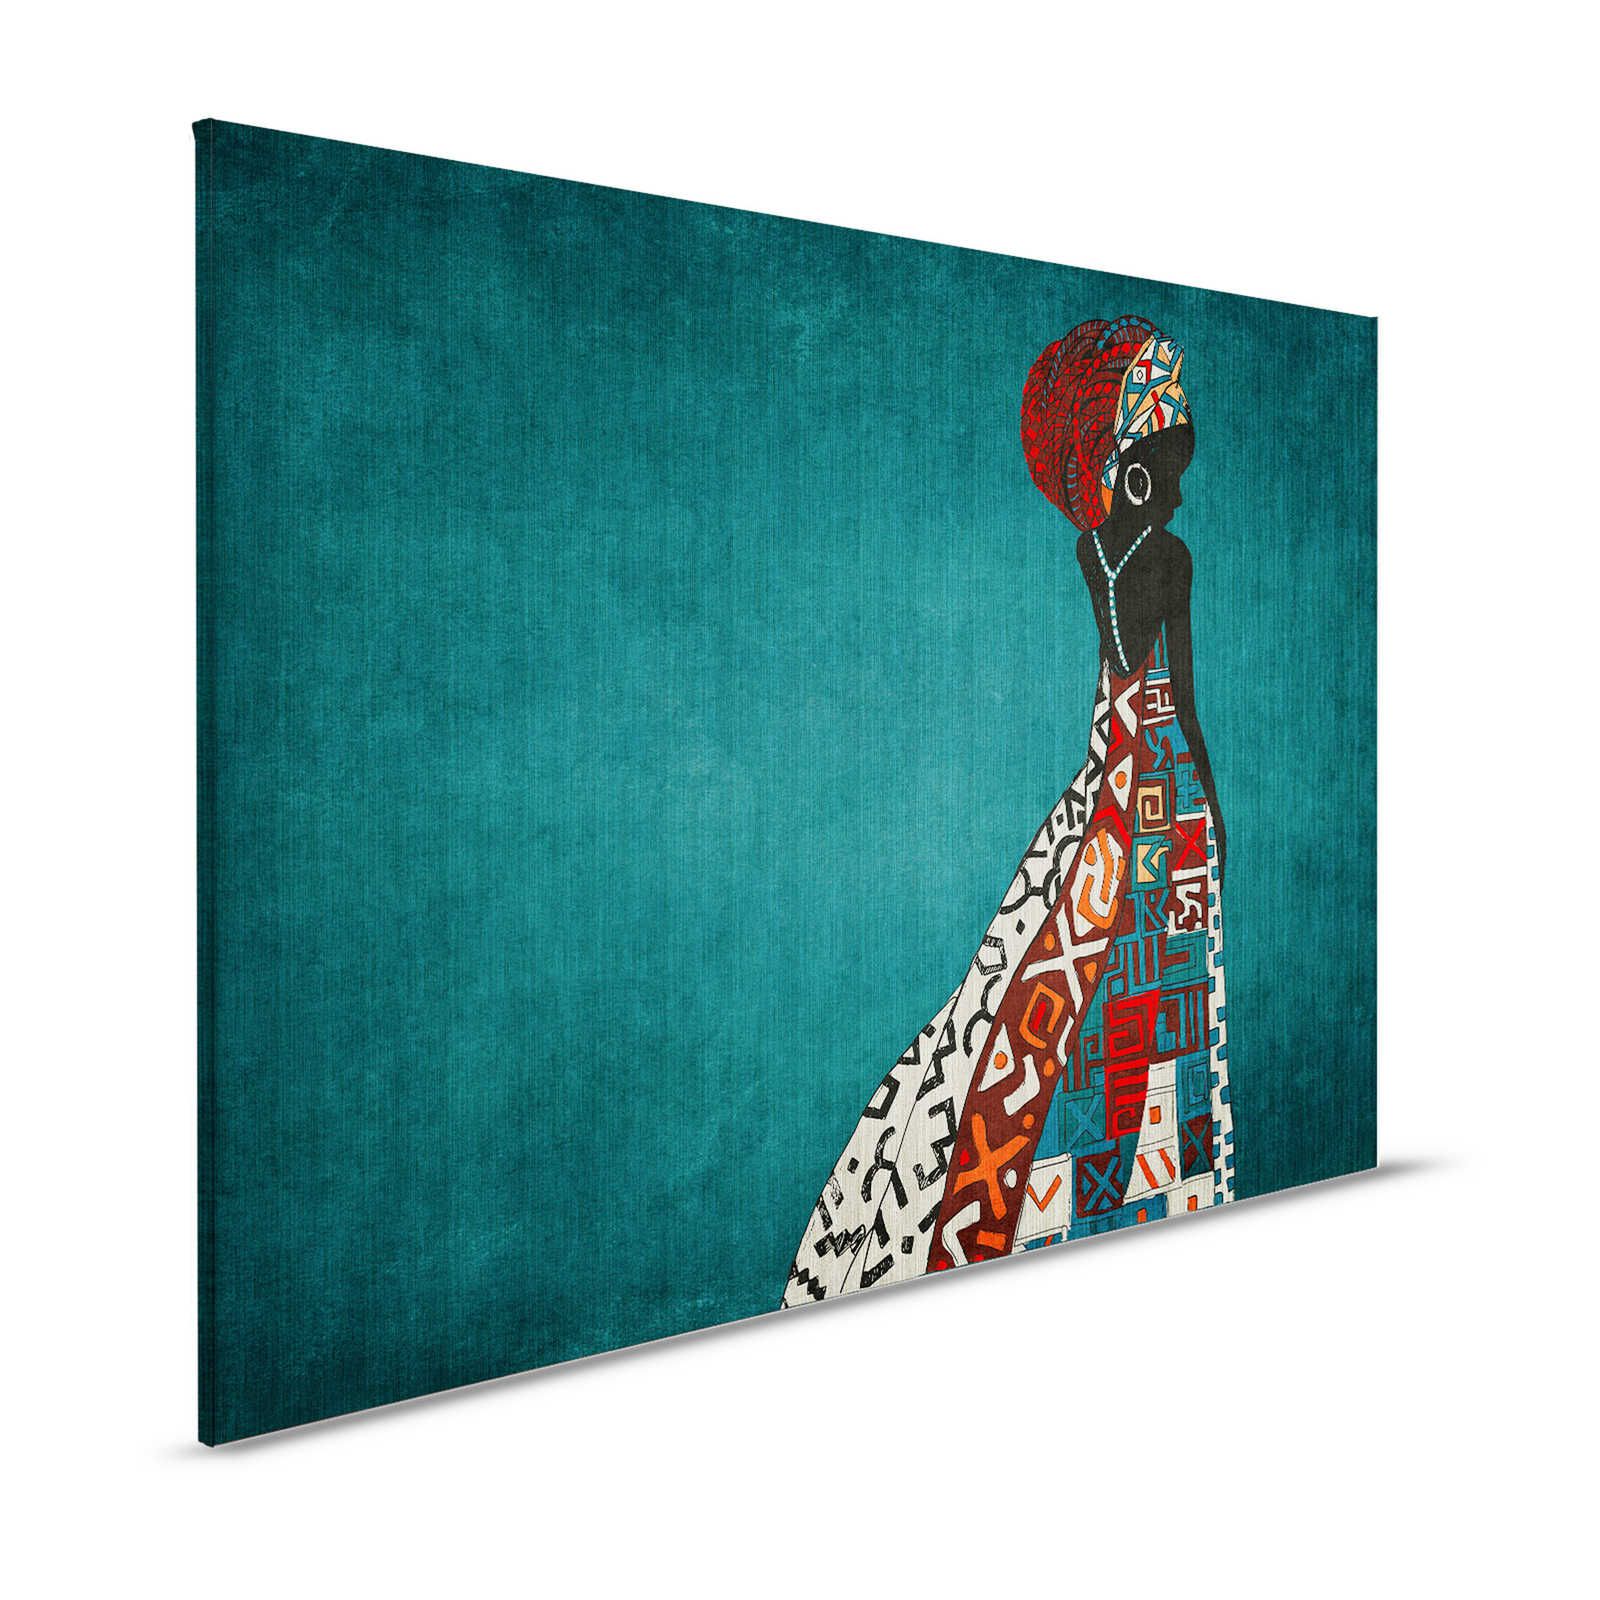 Nairobi 1 - Canvas painting Women Sillouette African Style - 1,20 m x 0,80 m
